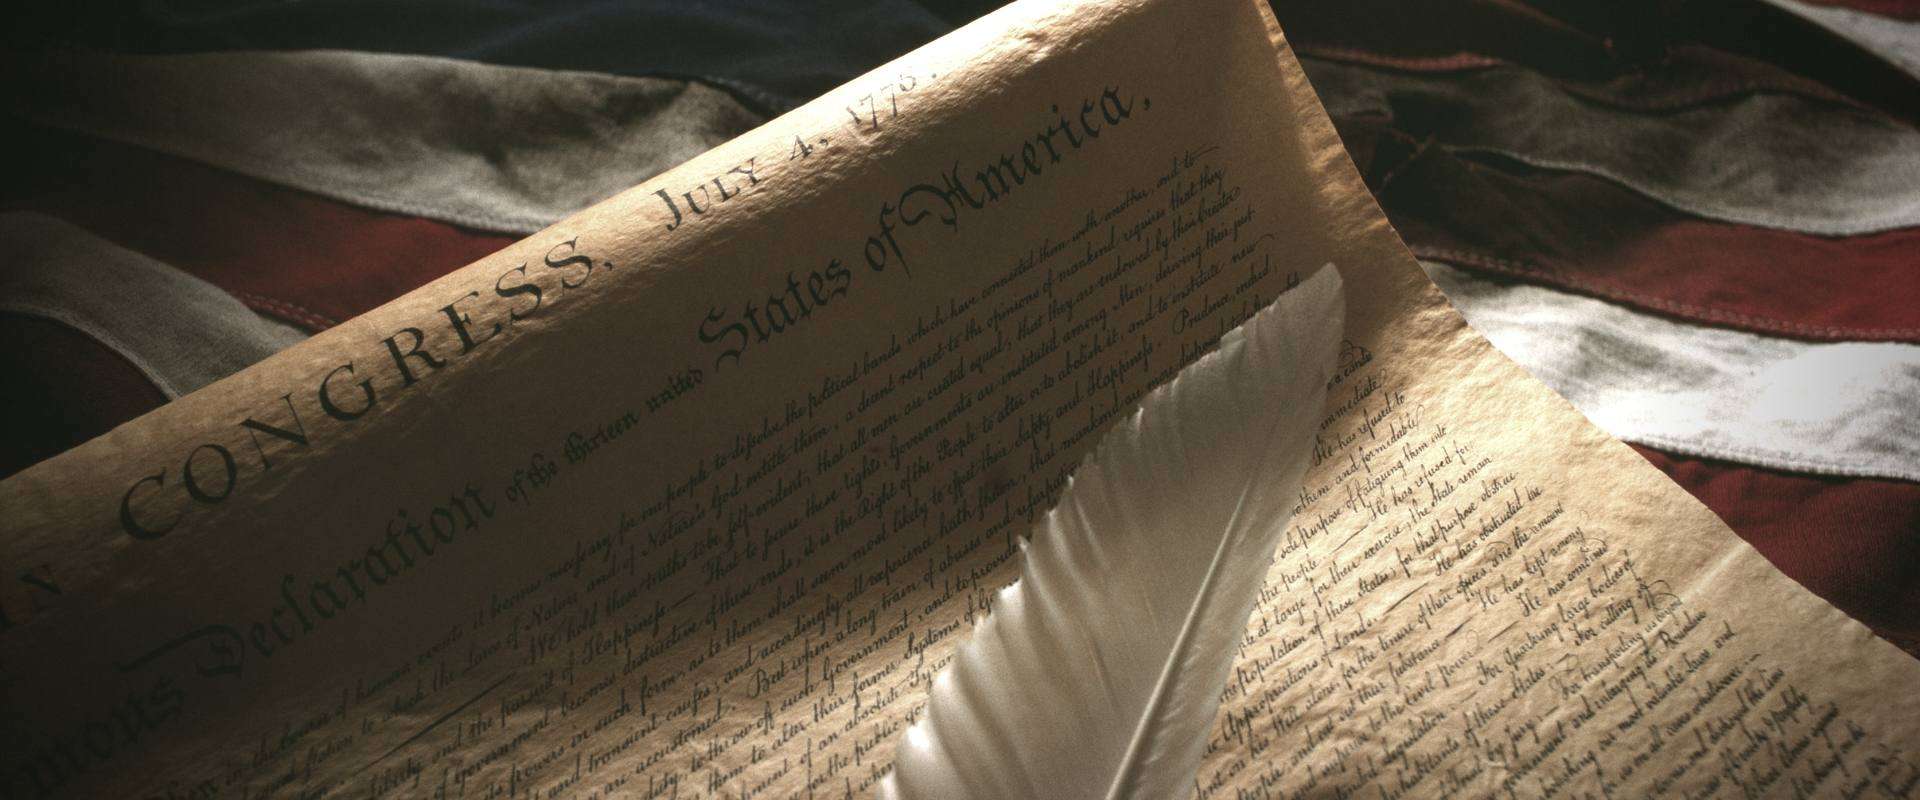 10 Facts About the Declaration of Independence